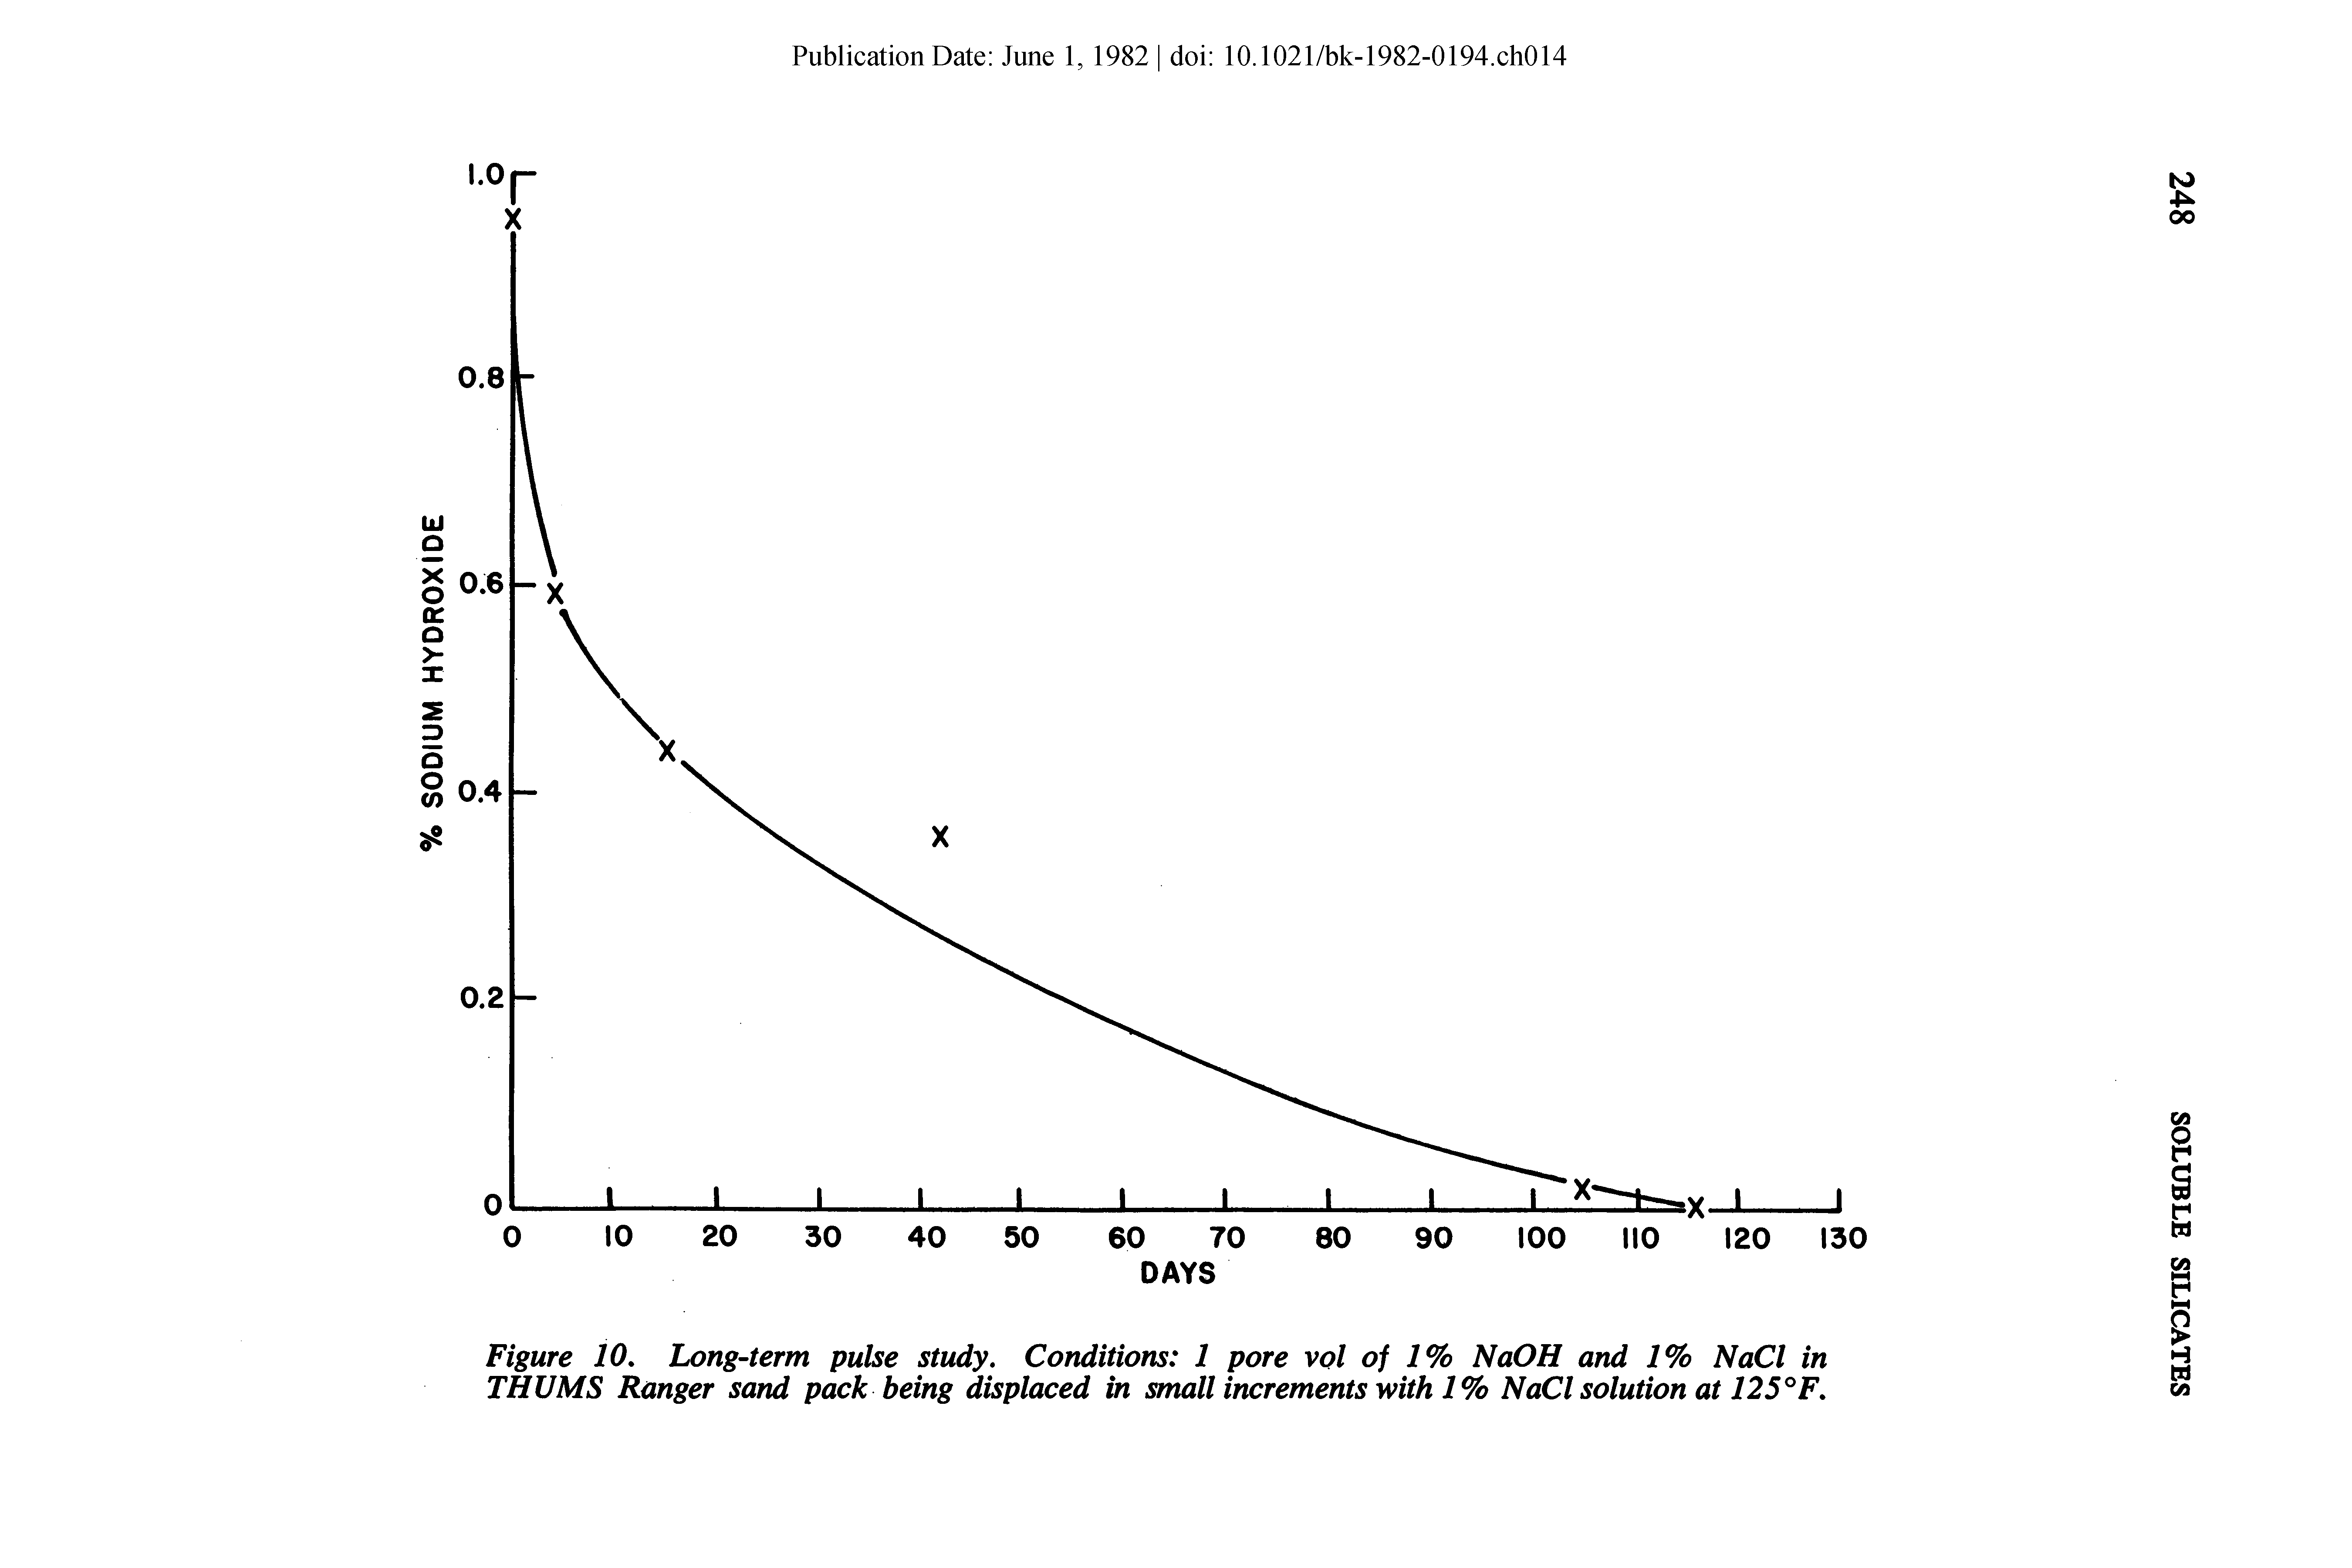 Figure 10. Long-term pulse study. Conditions 1 pore vol of 1% NaOH and 1% NaCl in THUMS Ranger sand pack being displaced in small increments with 1% NaCl solution at 125°F.